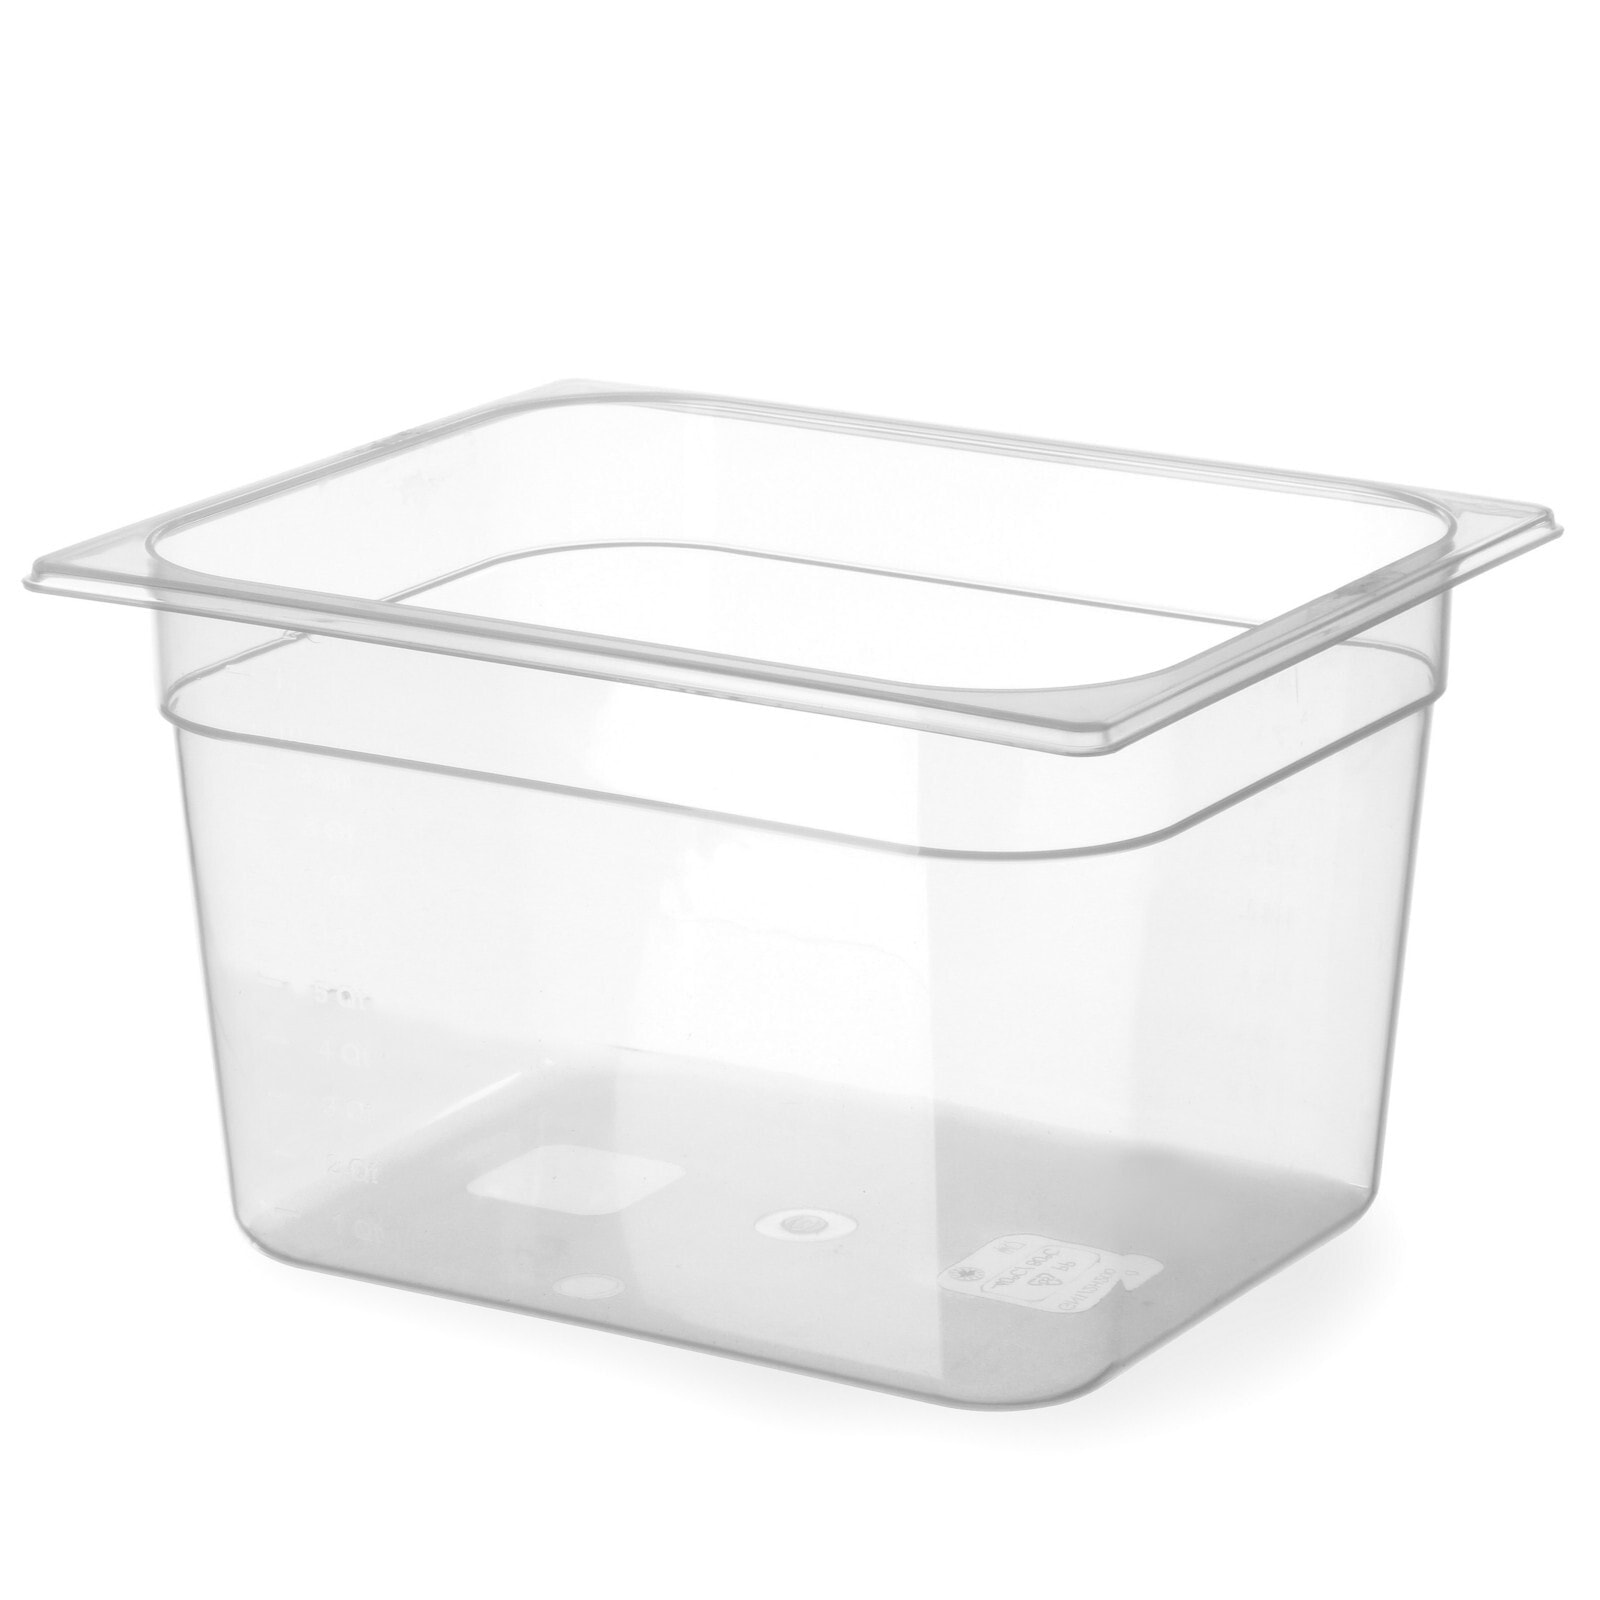 Gastronomy container made of polypropylene GN 1/2, height 100 mm - Hendi 880128